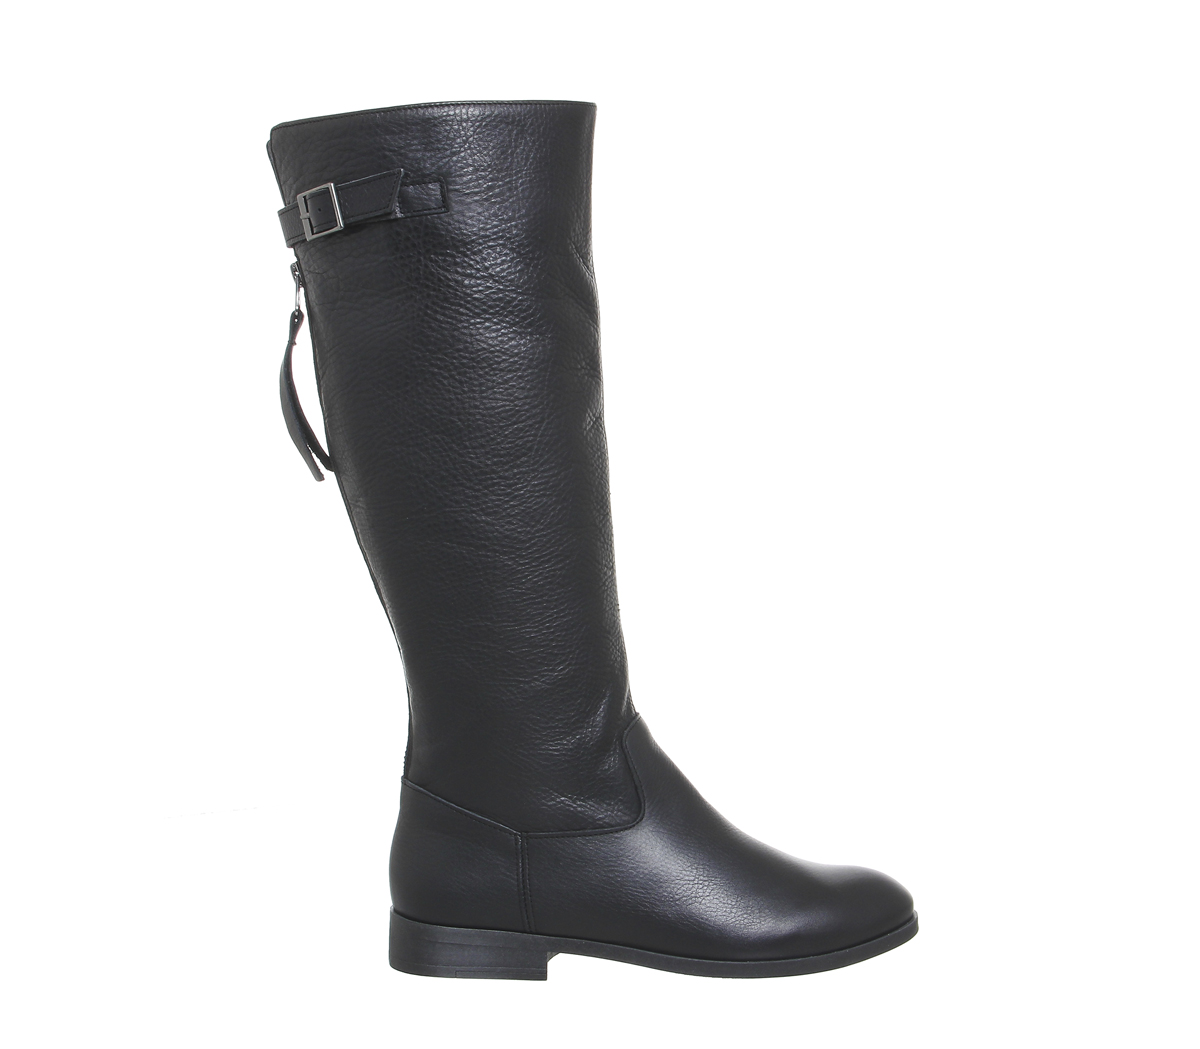 OFFICE Kinetic Knee Boots Black Leather - Knee High Boots